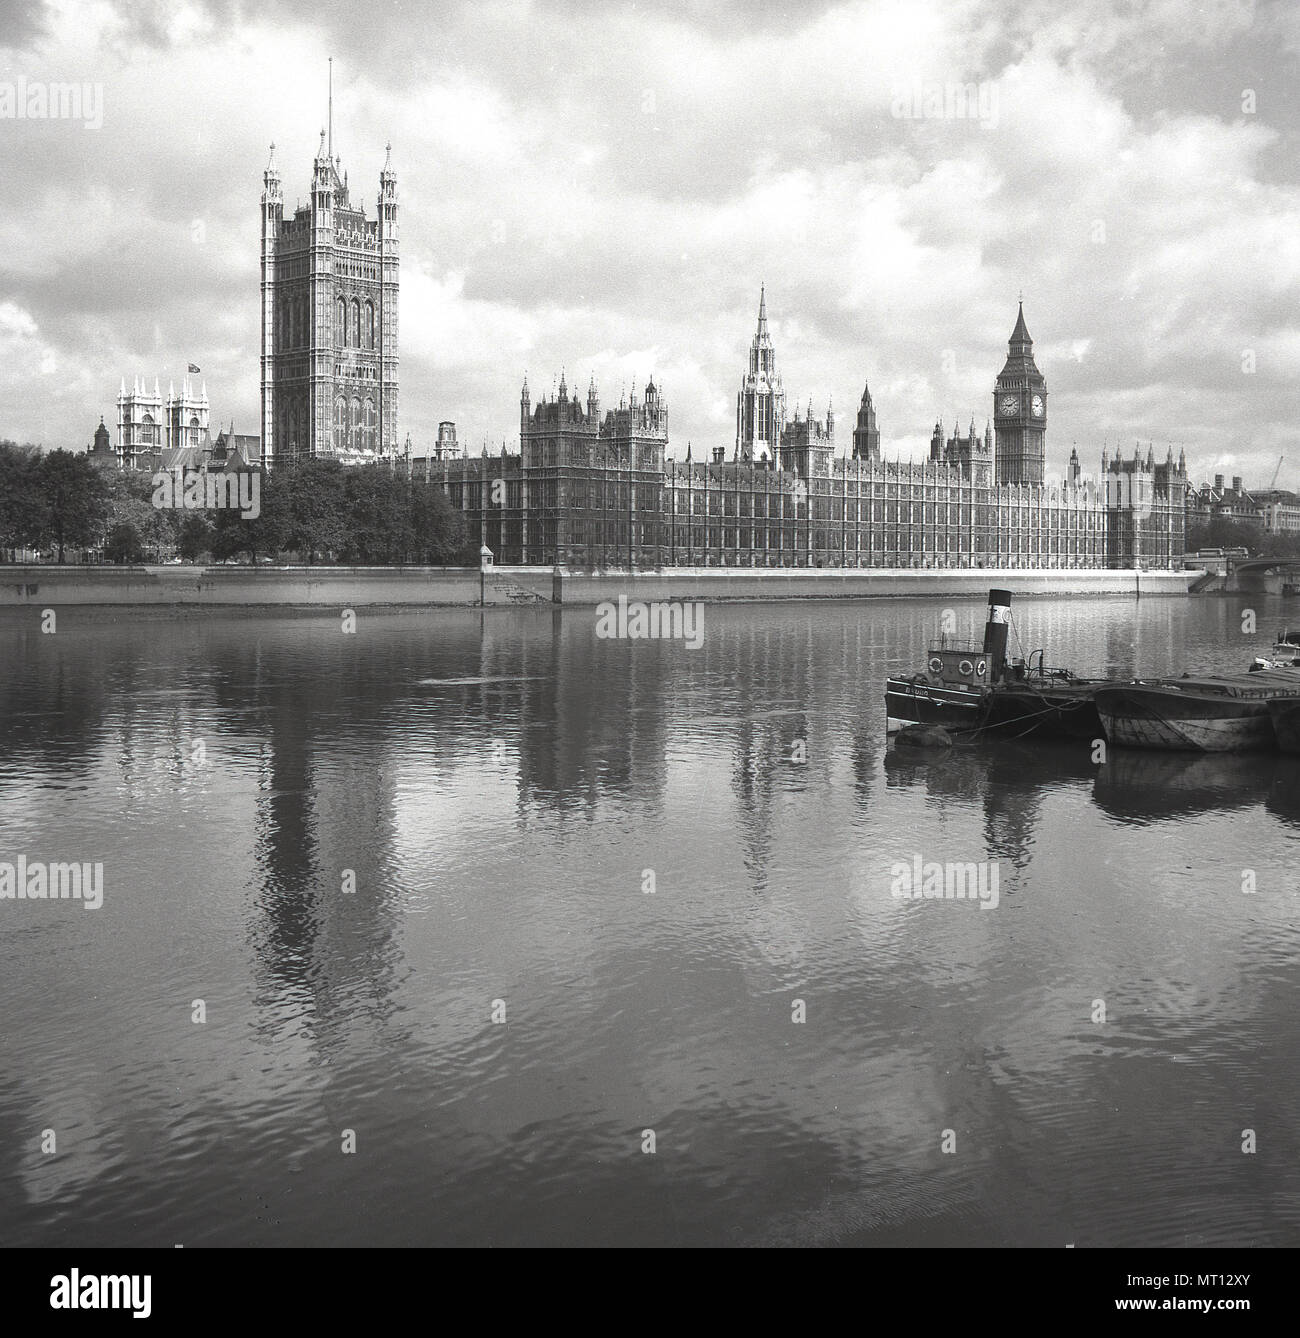 1950s, historical, view from the south of the river across the Thames, London, to the iconic buildings of the Palace of Westminster, meeting place of the UK Government. At the palace are the two Houses of  the UK Parliament, the House of Commons and the House of Lords. Stock Photo